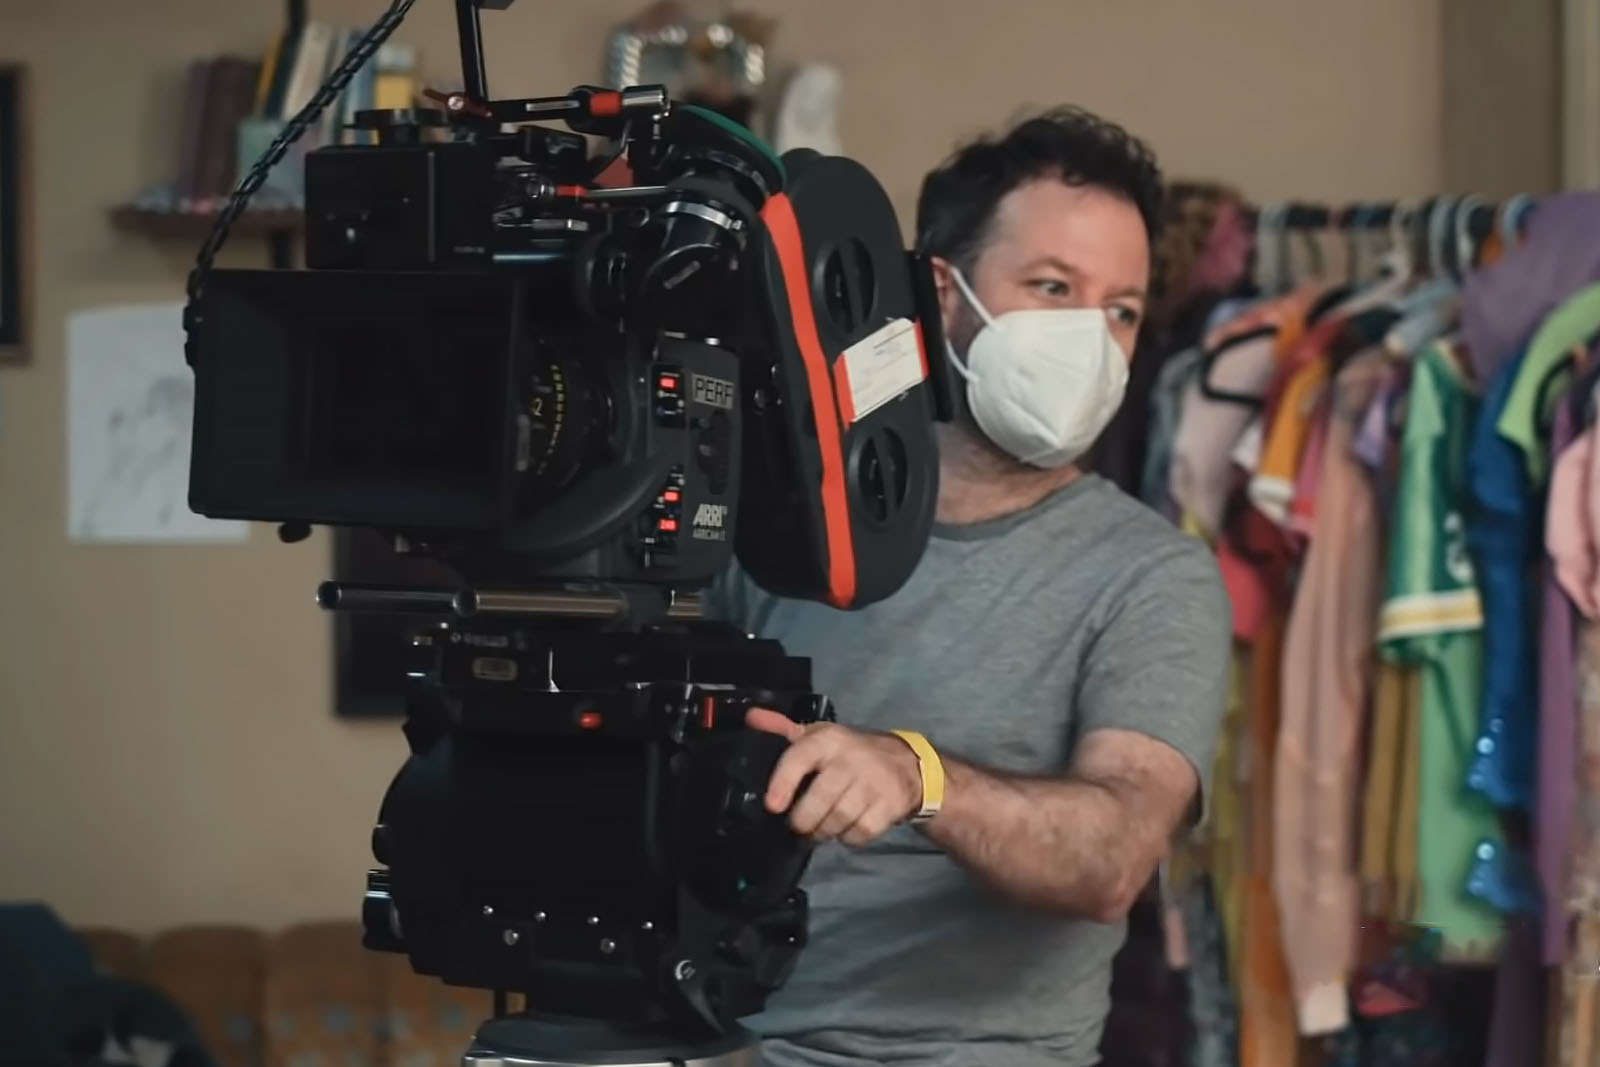 Marcell Rév is Euphoria’s main cinematographer. Image © HBO